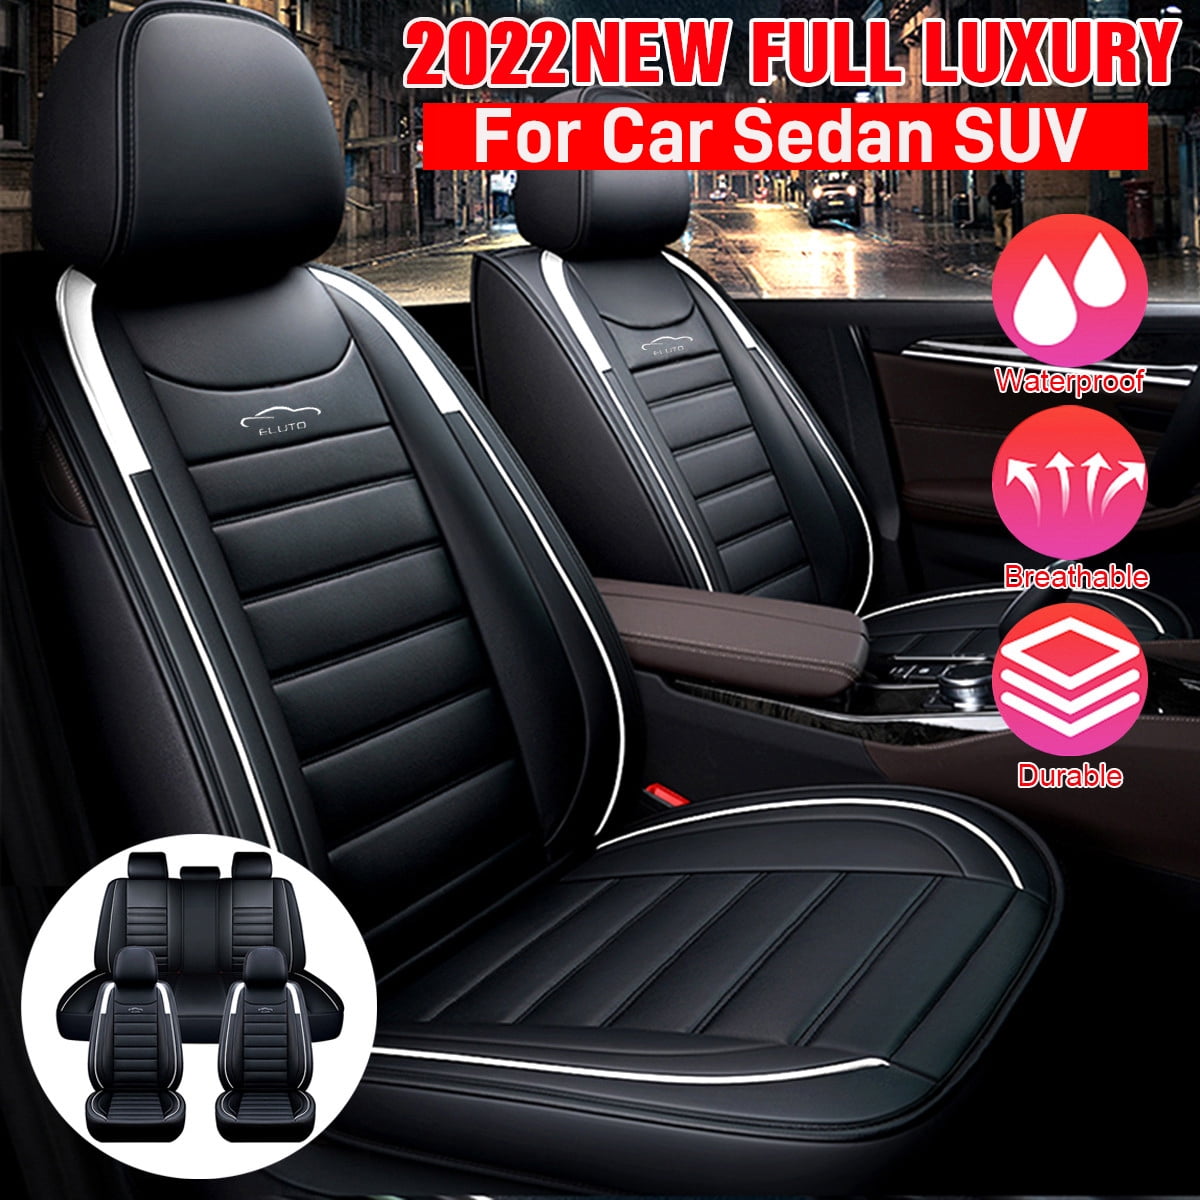 O2MAT Car Seat Covers,Waterproof Faux Leather Automotive Vehicle Cushion  Cover with Lumbar Pillow, Fit Most Cars SUV Pick-up Truck Universal for  Auto